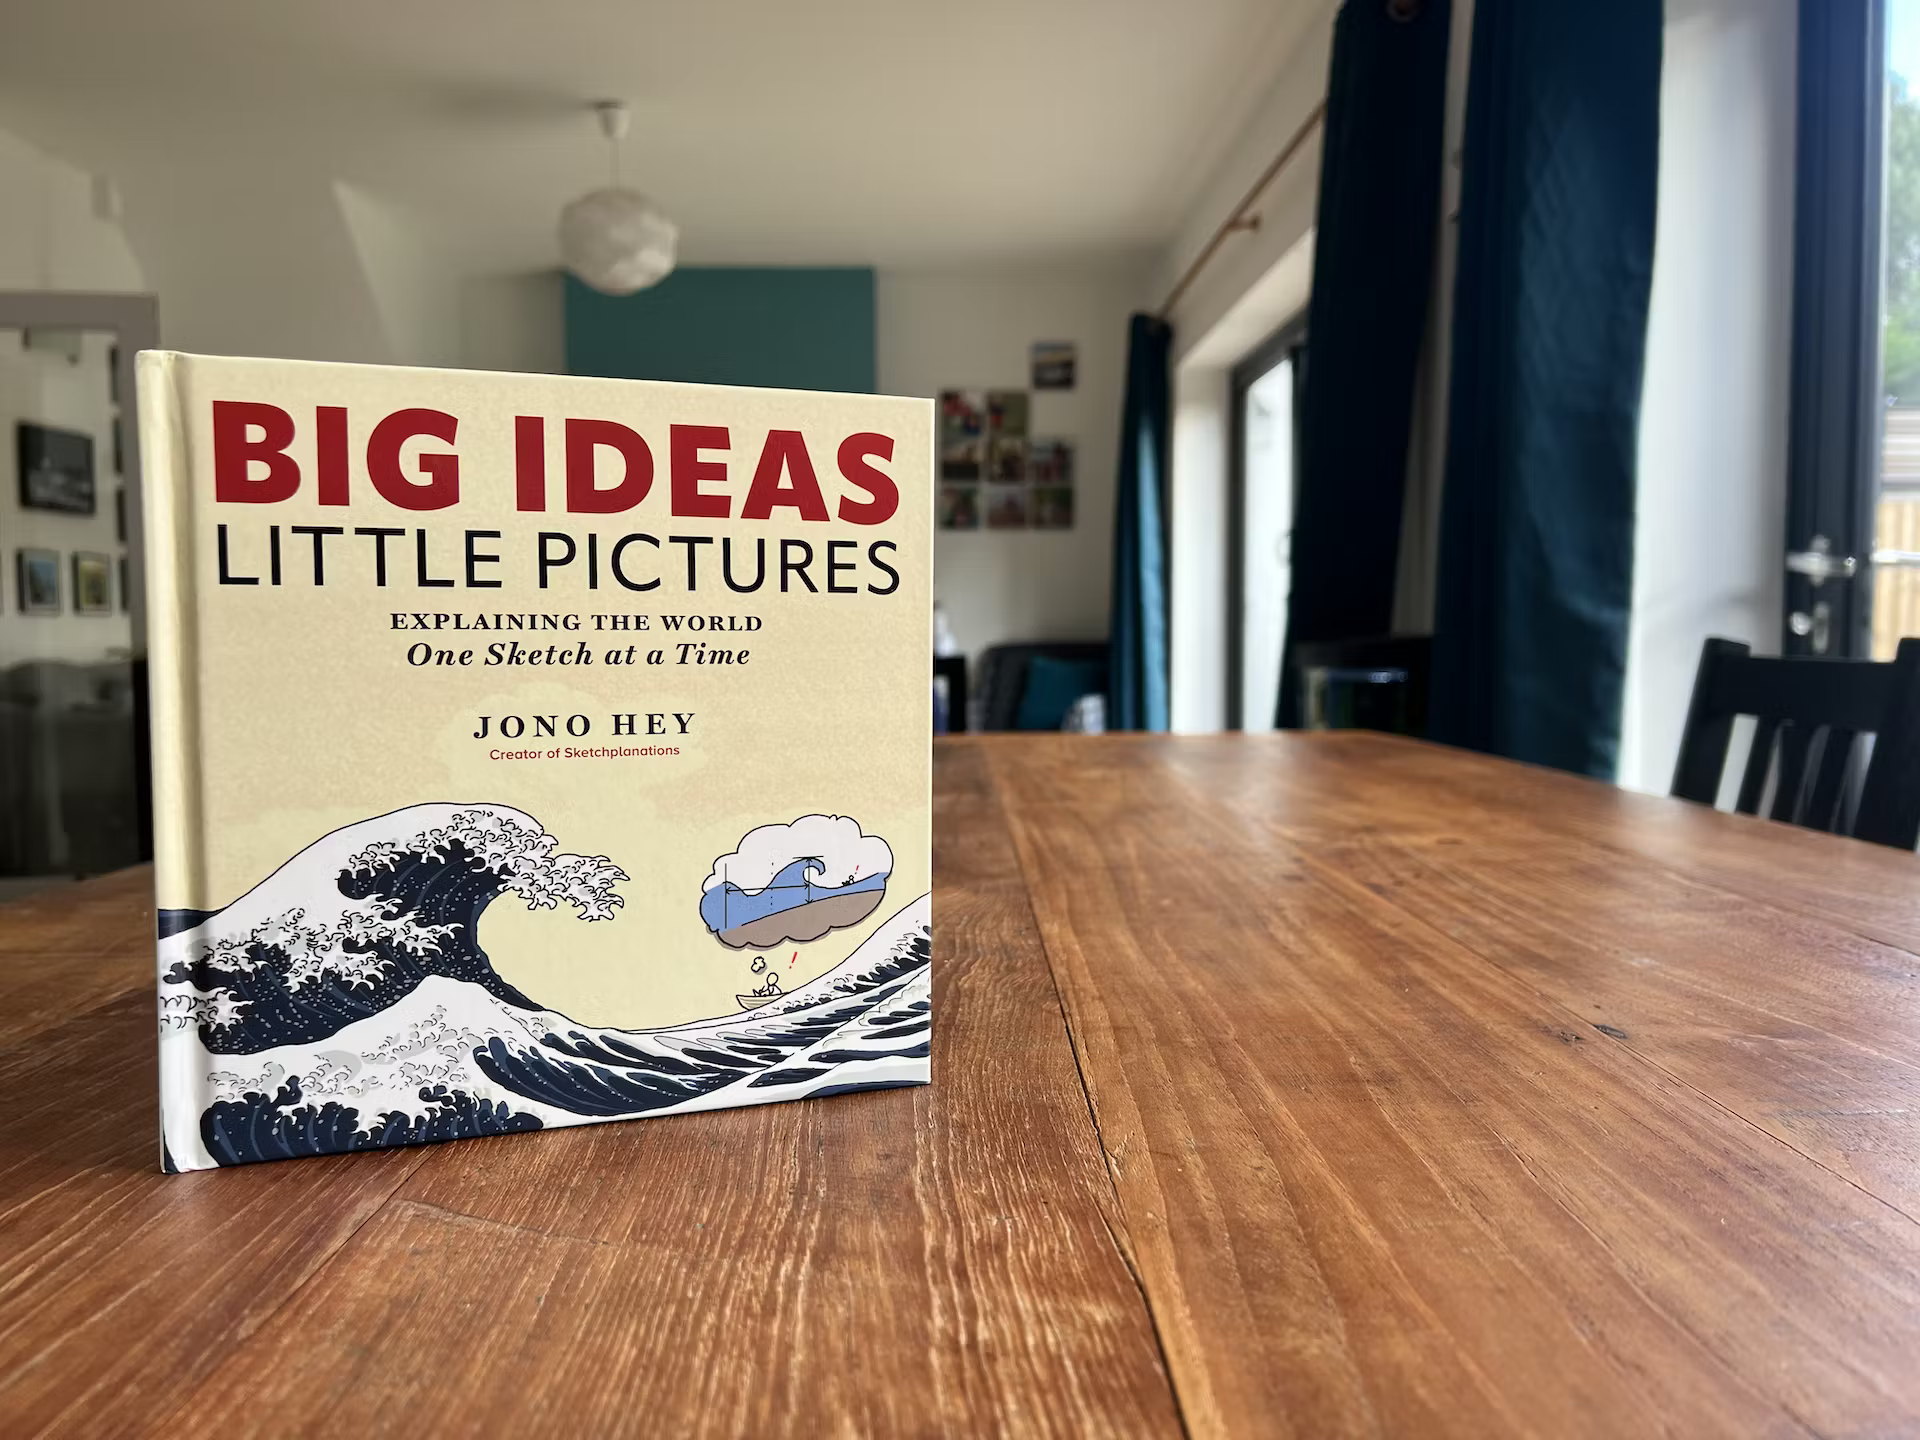 Photo of the book Big Ideas Little Pictures standing on a wooden table.